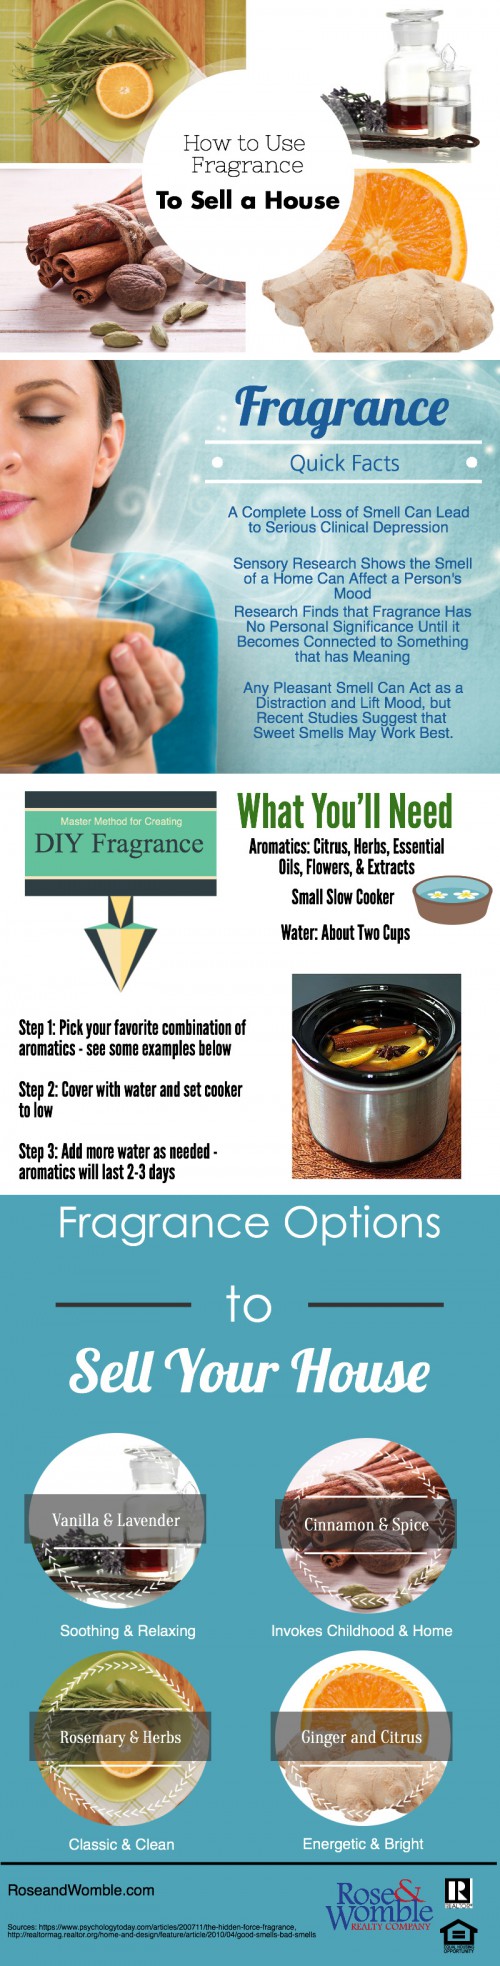 home fragrance facts and tips to help with listing a home Rose & Womble Realty Virginia Beach Virginia